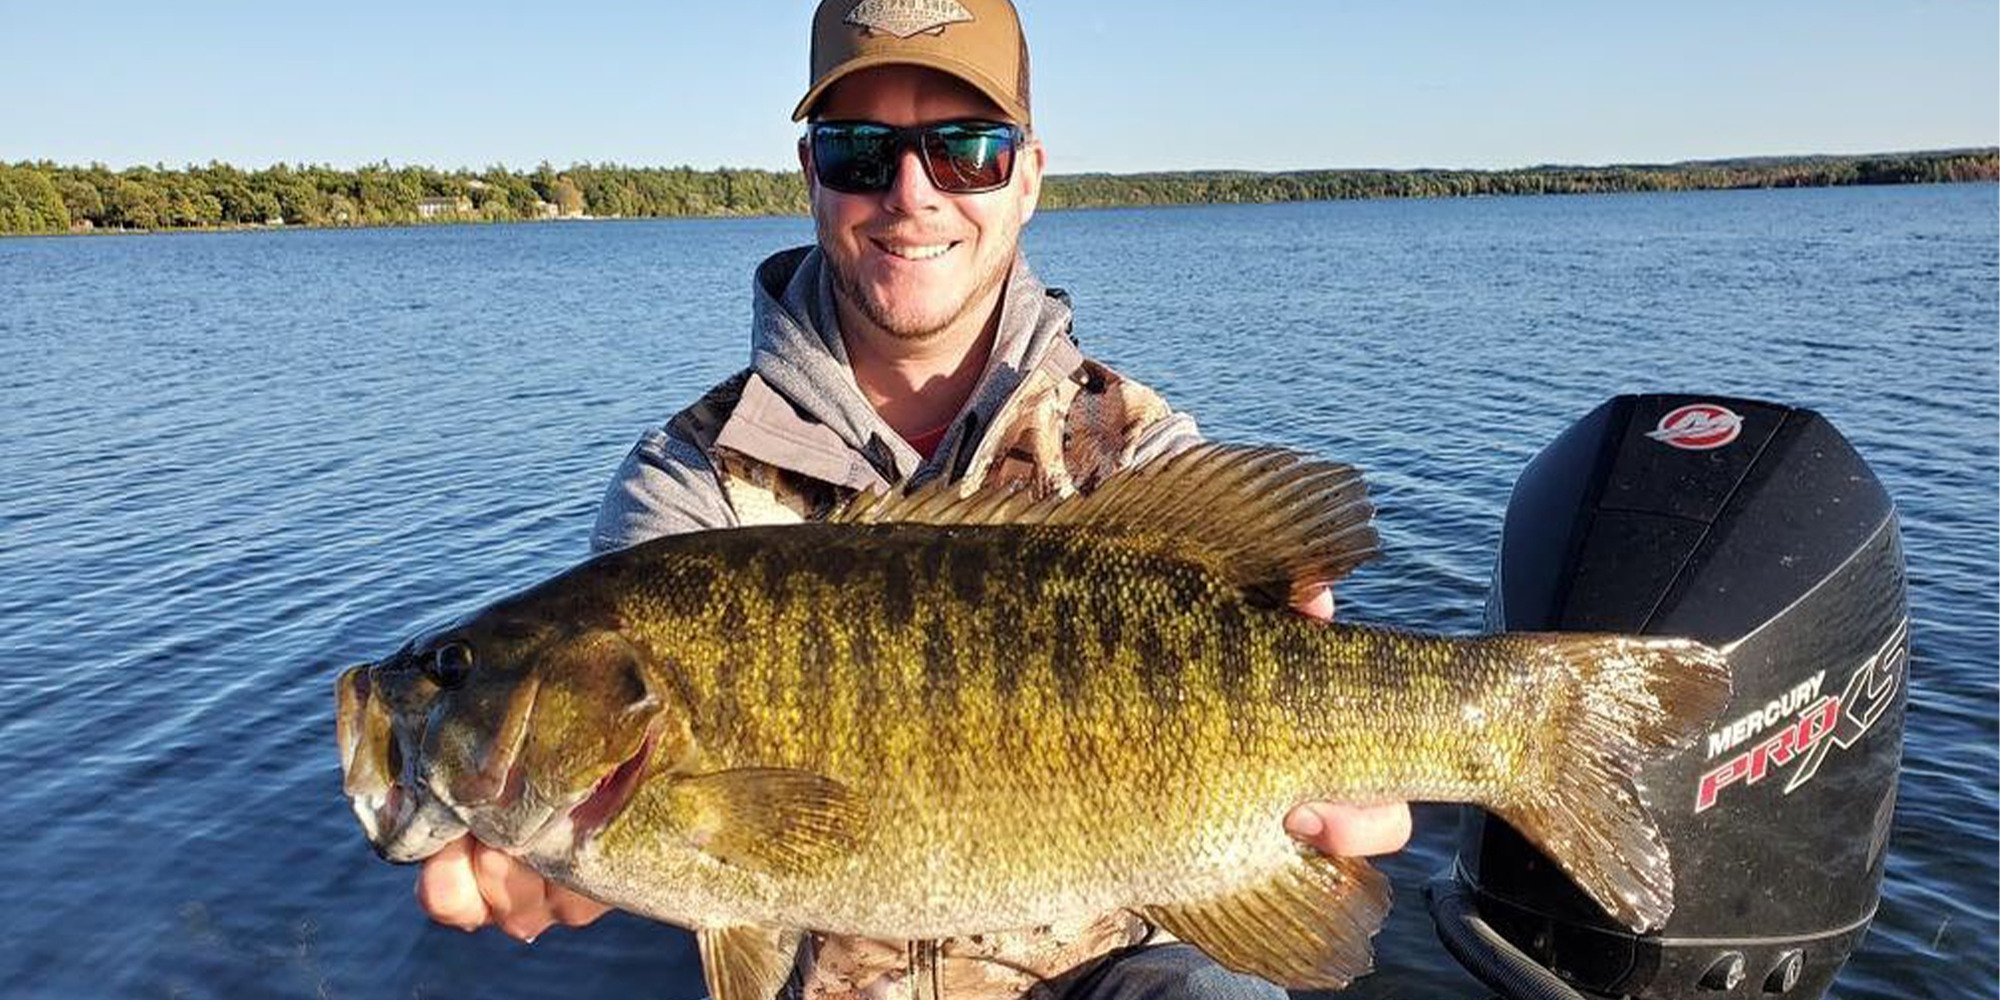 Top 5 Baits for Smallmouth and Largemouth Bass in Ontario